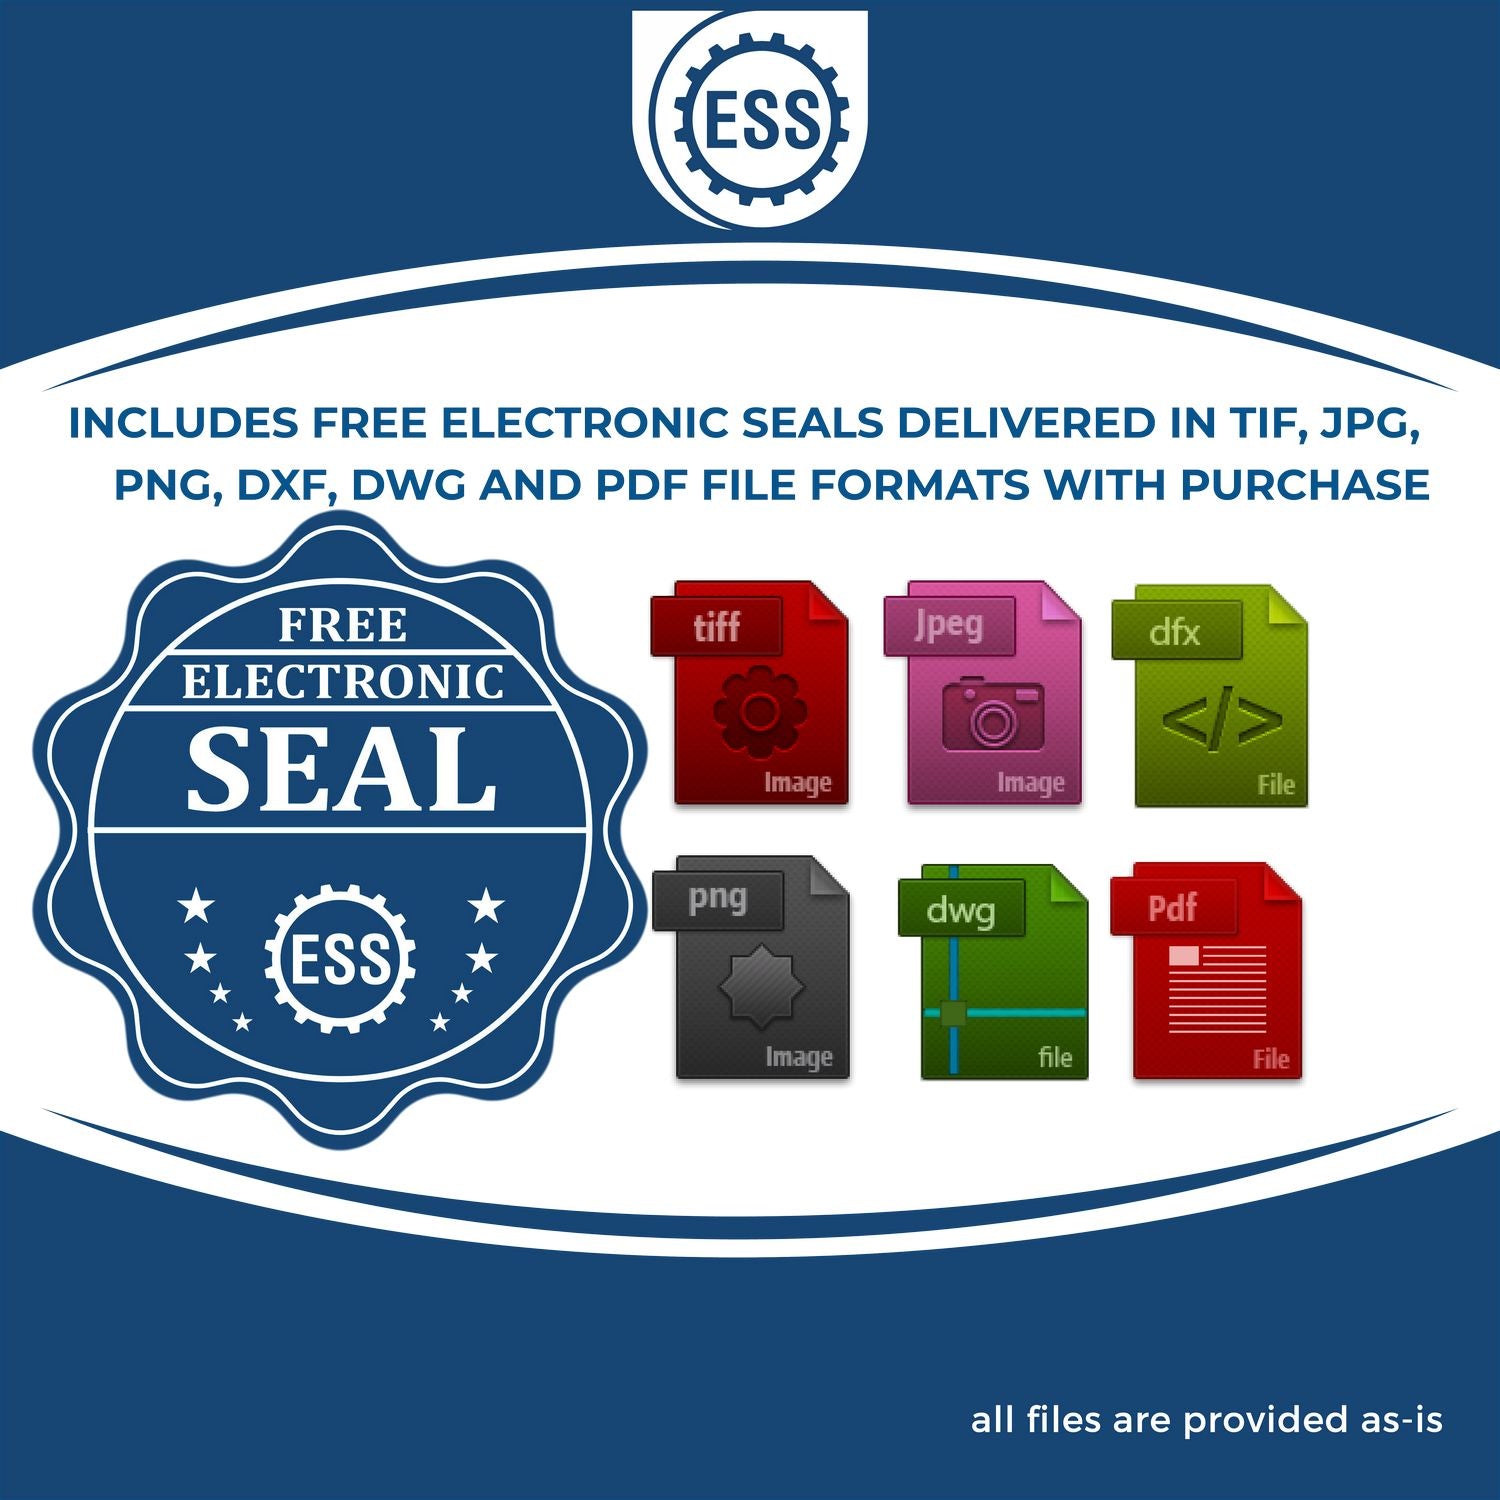 An infographic for the free electronic seal for the Soft South Dakota Professional Engineer Seal illustrating the different file type icons such as DXF, DWG, TIF, JPG and PNG.